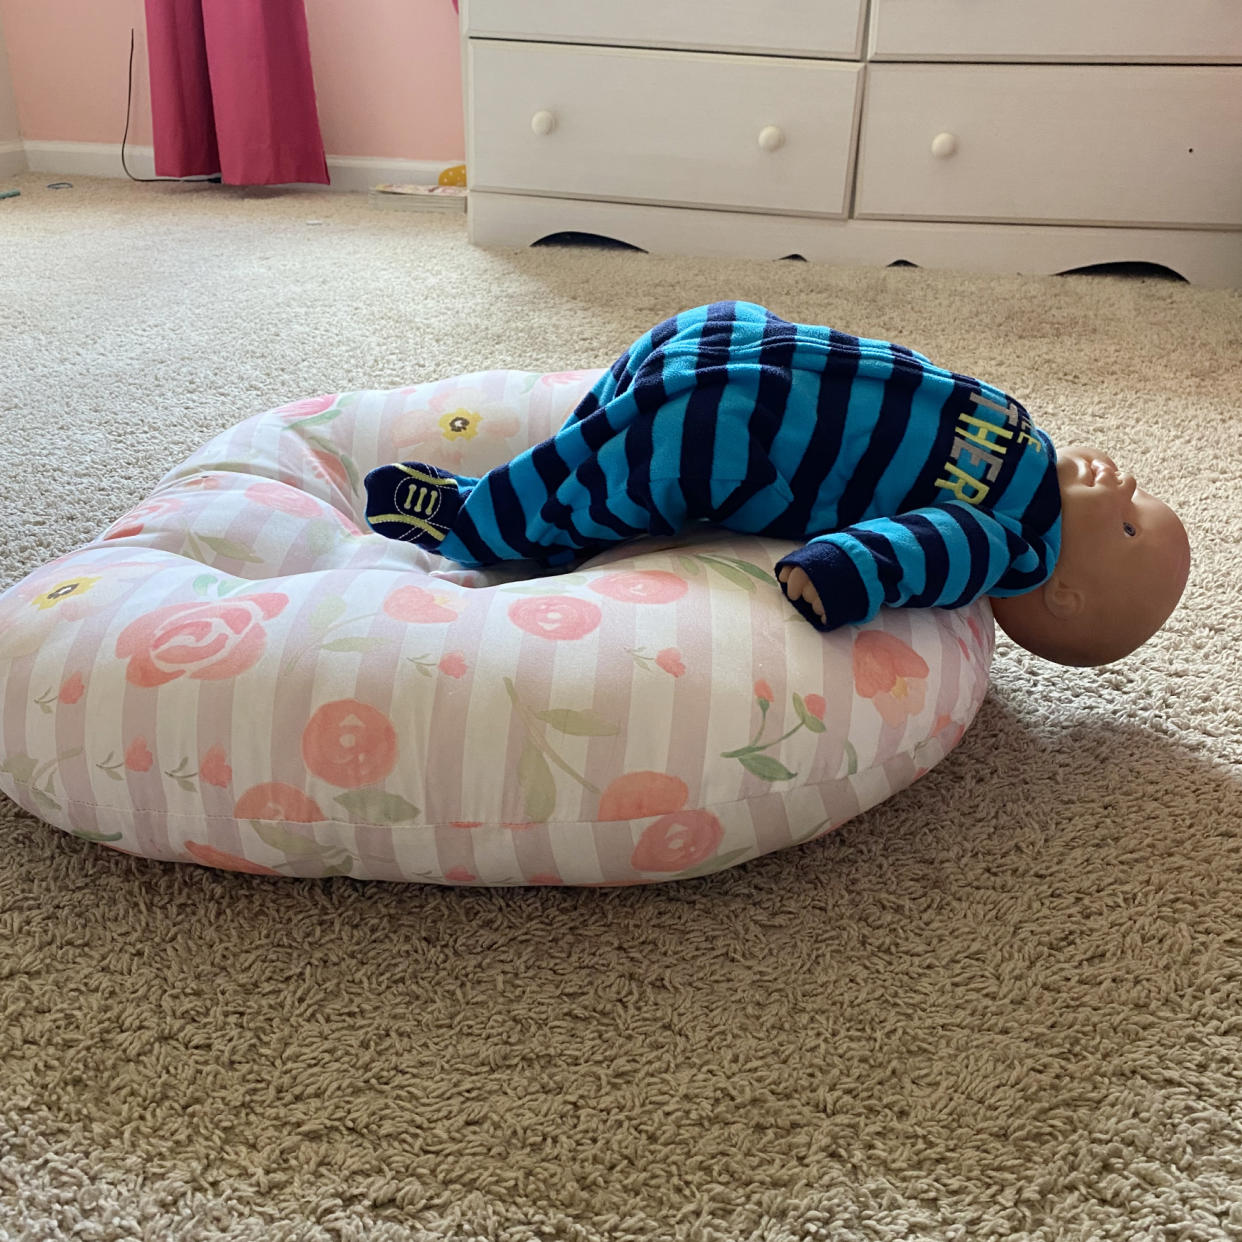 Image: A 3-month-old was found hanging off a Boppy lounger after the child kicked her legs, pushing herself upward, according to a report submitted by a parent to the CPSC in 2020. (Consumer Product Safety Commission)